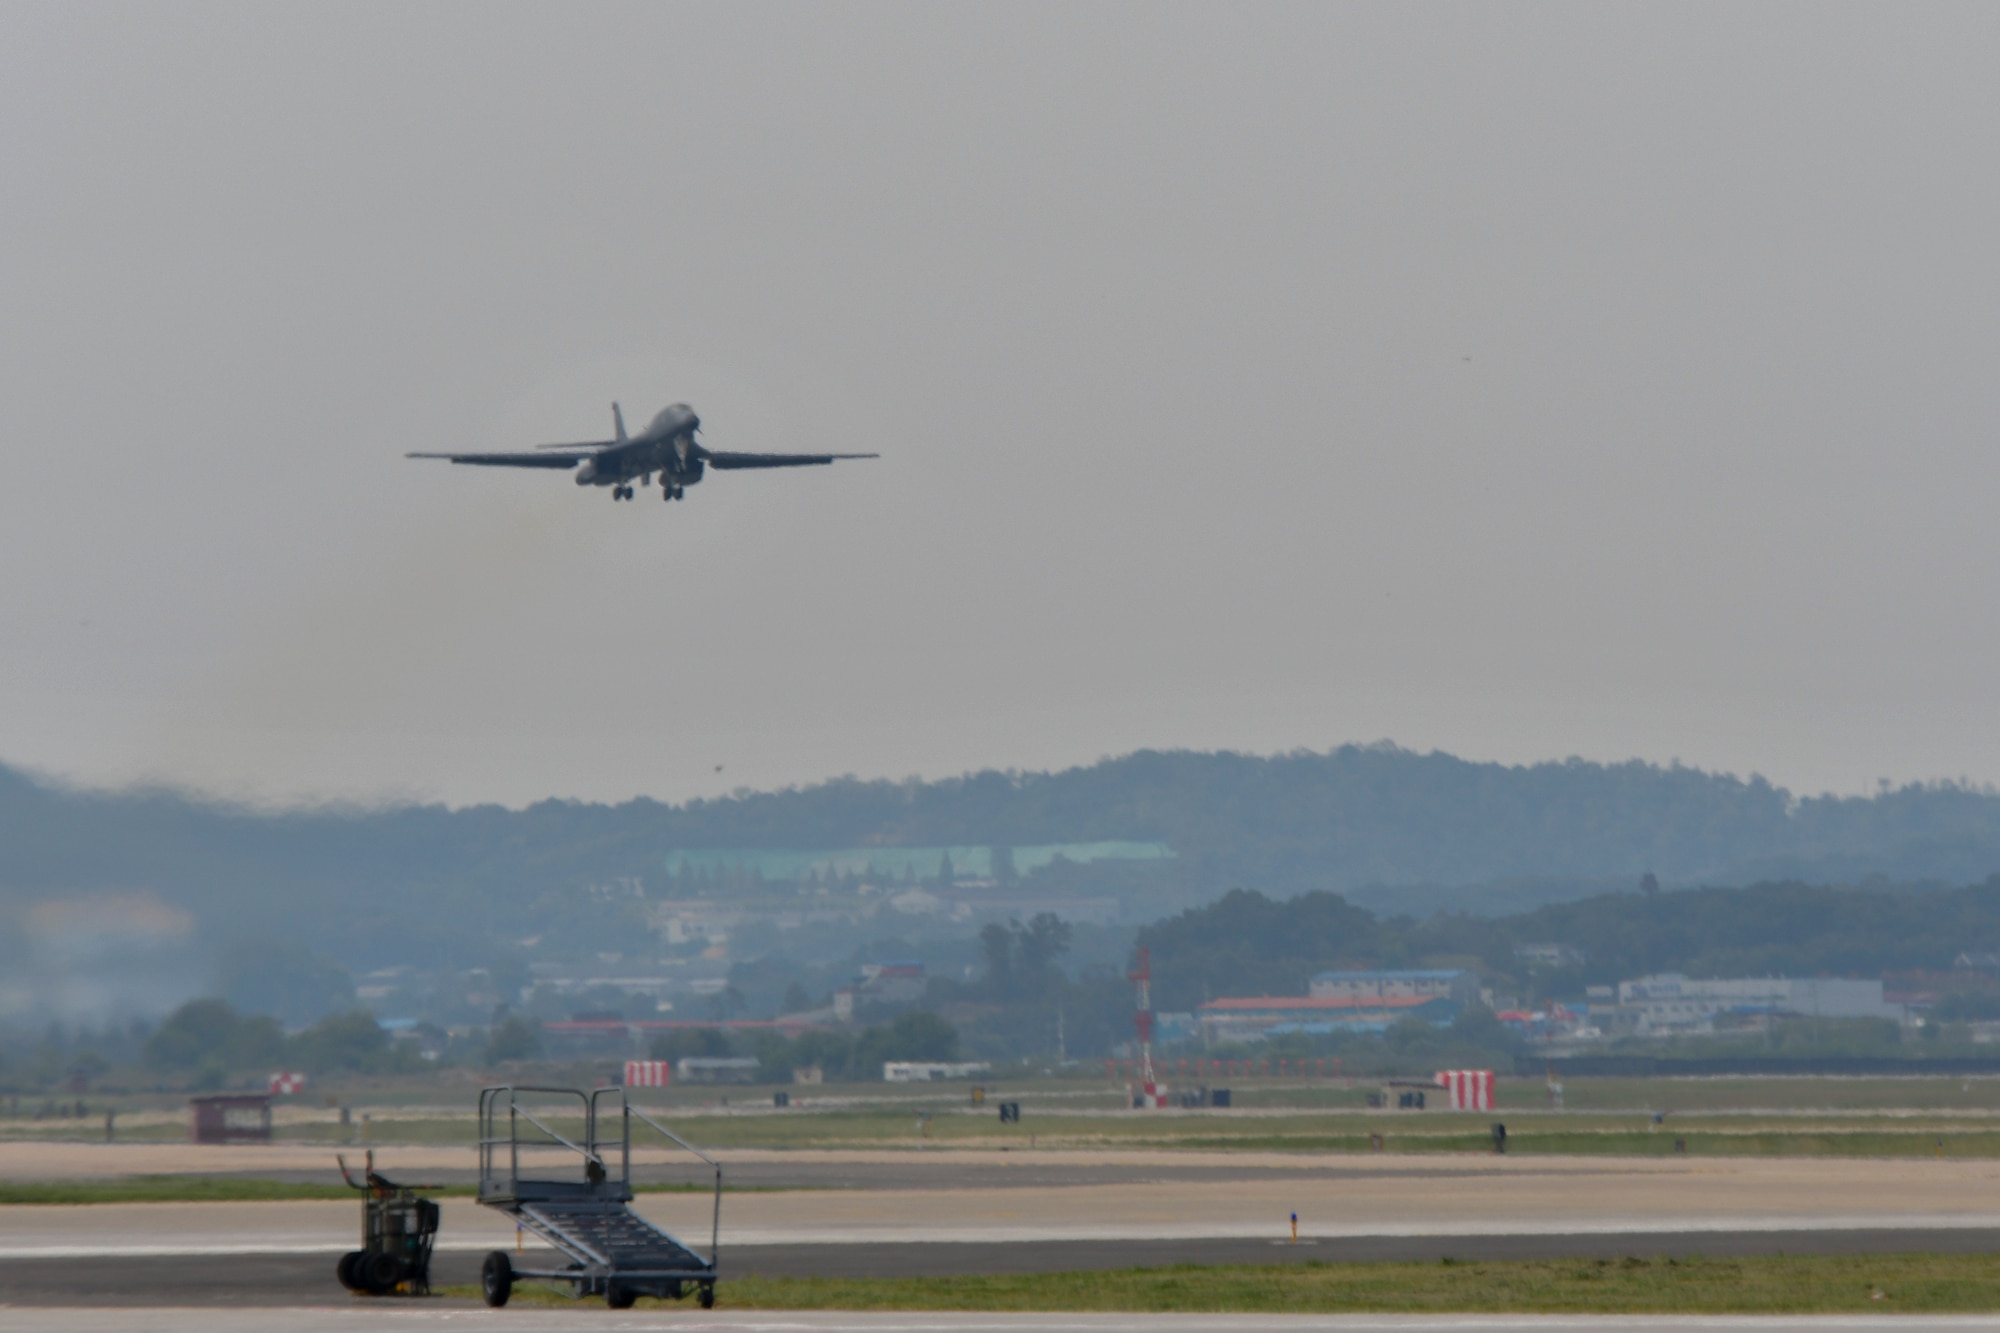 A U.S. Air Force B-1B Lancer deployed from Andersen Air Base, Guam, performs a flyover at Osan Air Base, Republic of Korea, Sept. 21, 2016. The Lancer had just conducted the closest flight to the North Korean border in its operational history, as well as landing on the Korean peninsula for the first time in 20 years. The B-1 is the backbone of the U.S. long-range bomber mission and is capable of carrying the largest payload of both guided and unguided weapons in the Air Force inventory. (U.S. Air Force photo by Senior Airman Victor J. Caputo)